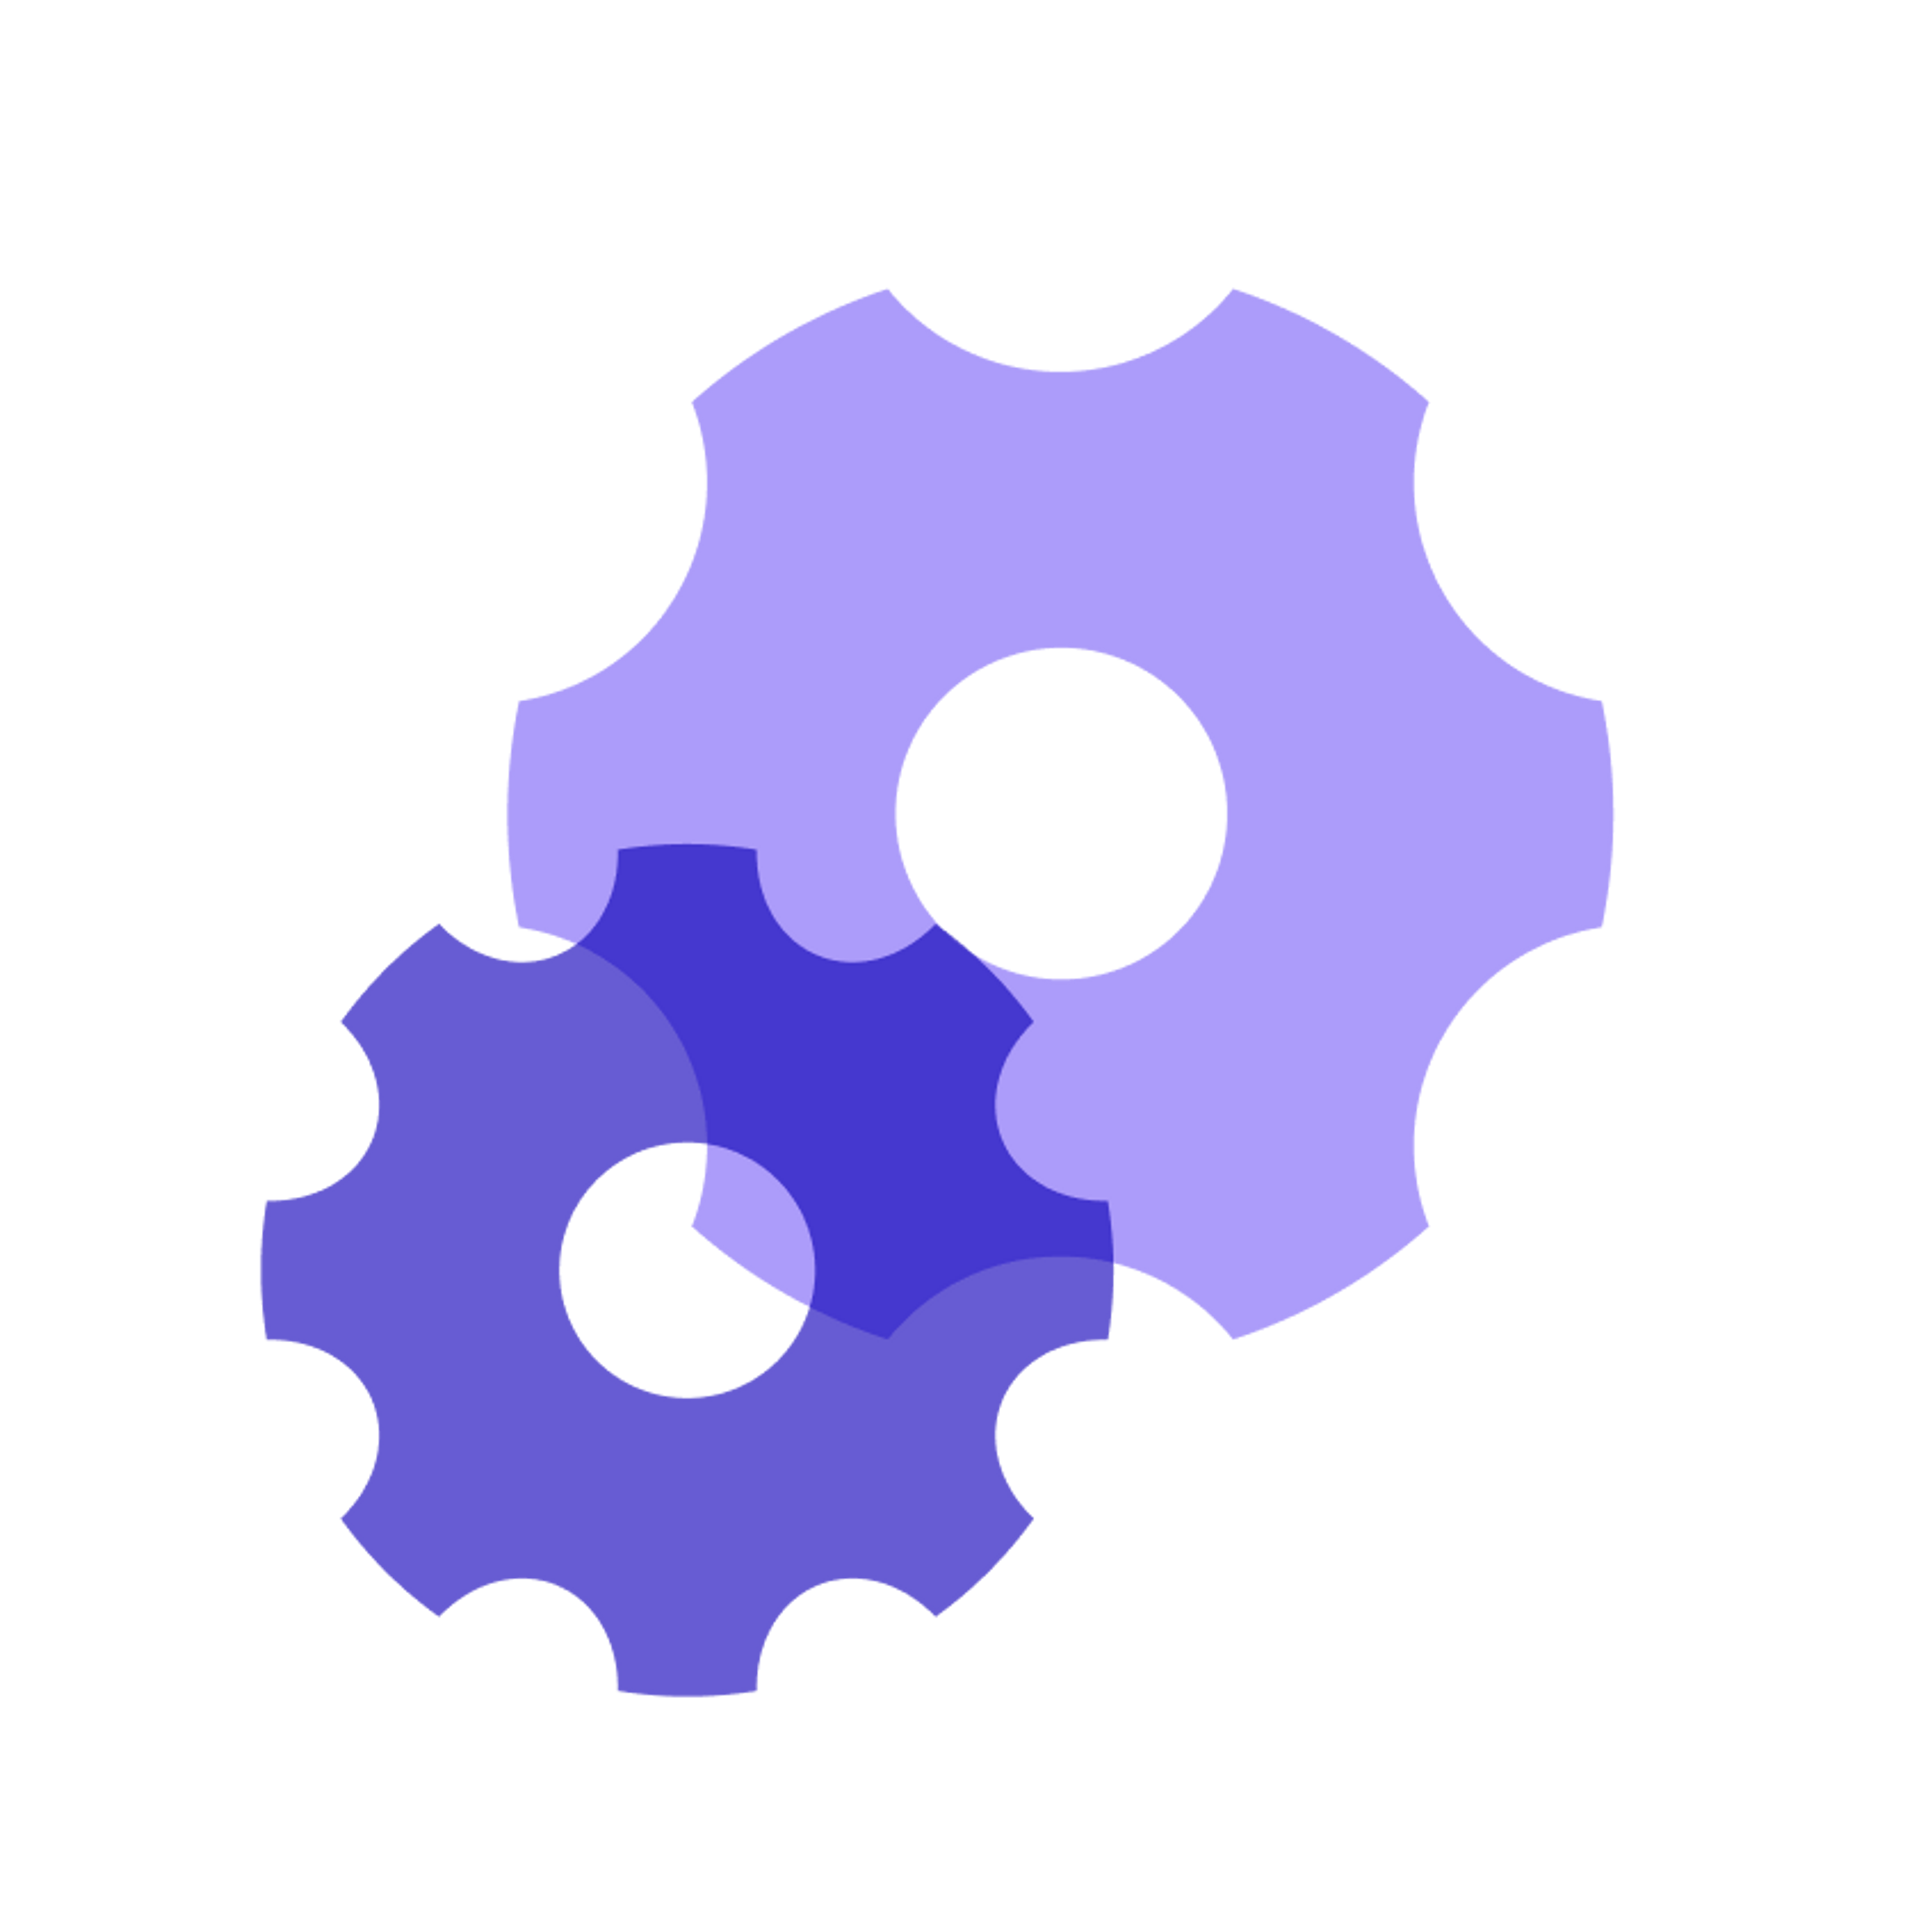 A purple icon of gears on a transparent background